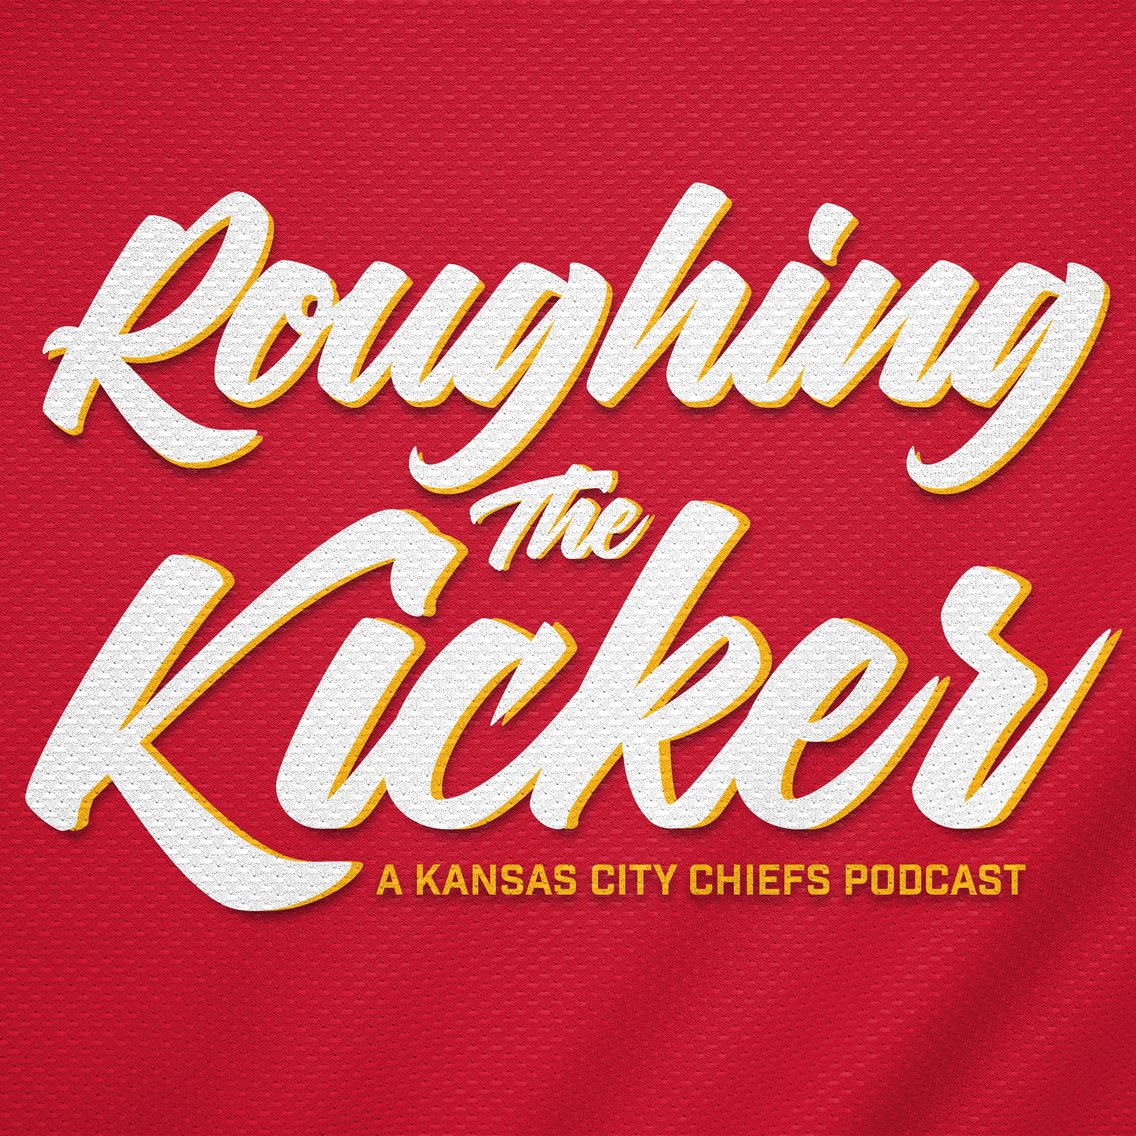 Roughing the Kicker - Cover Image